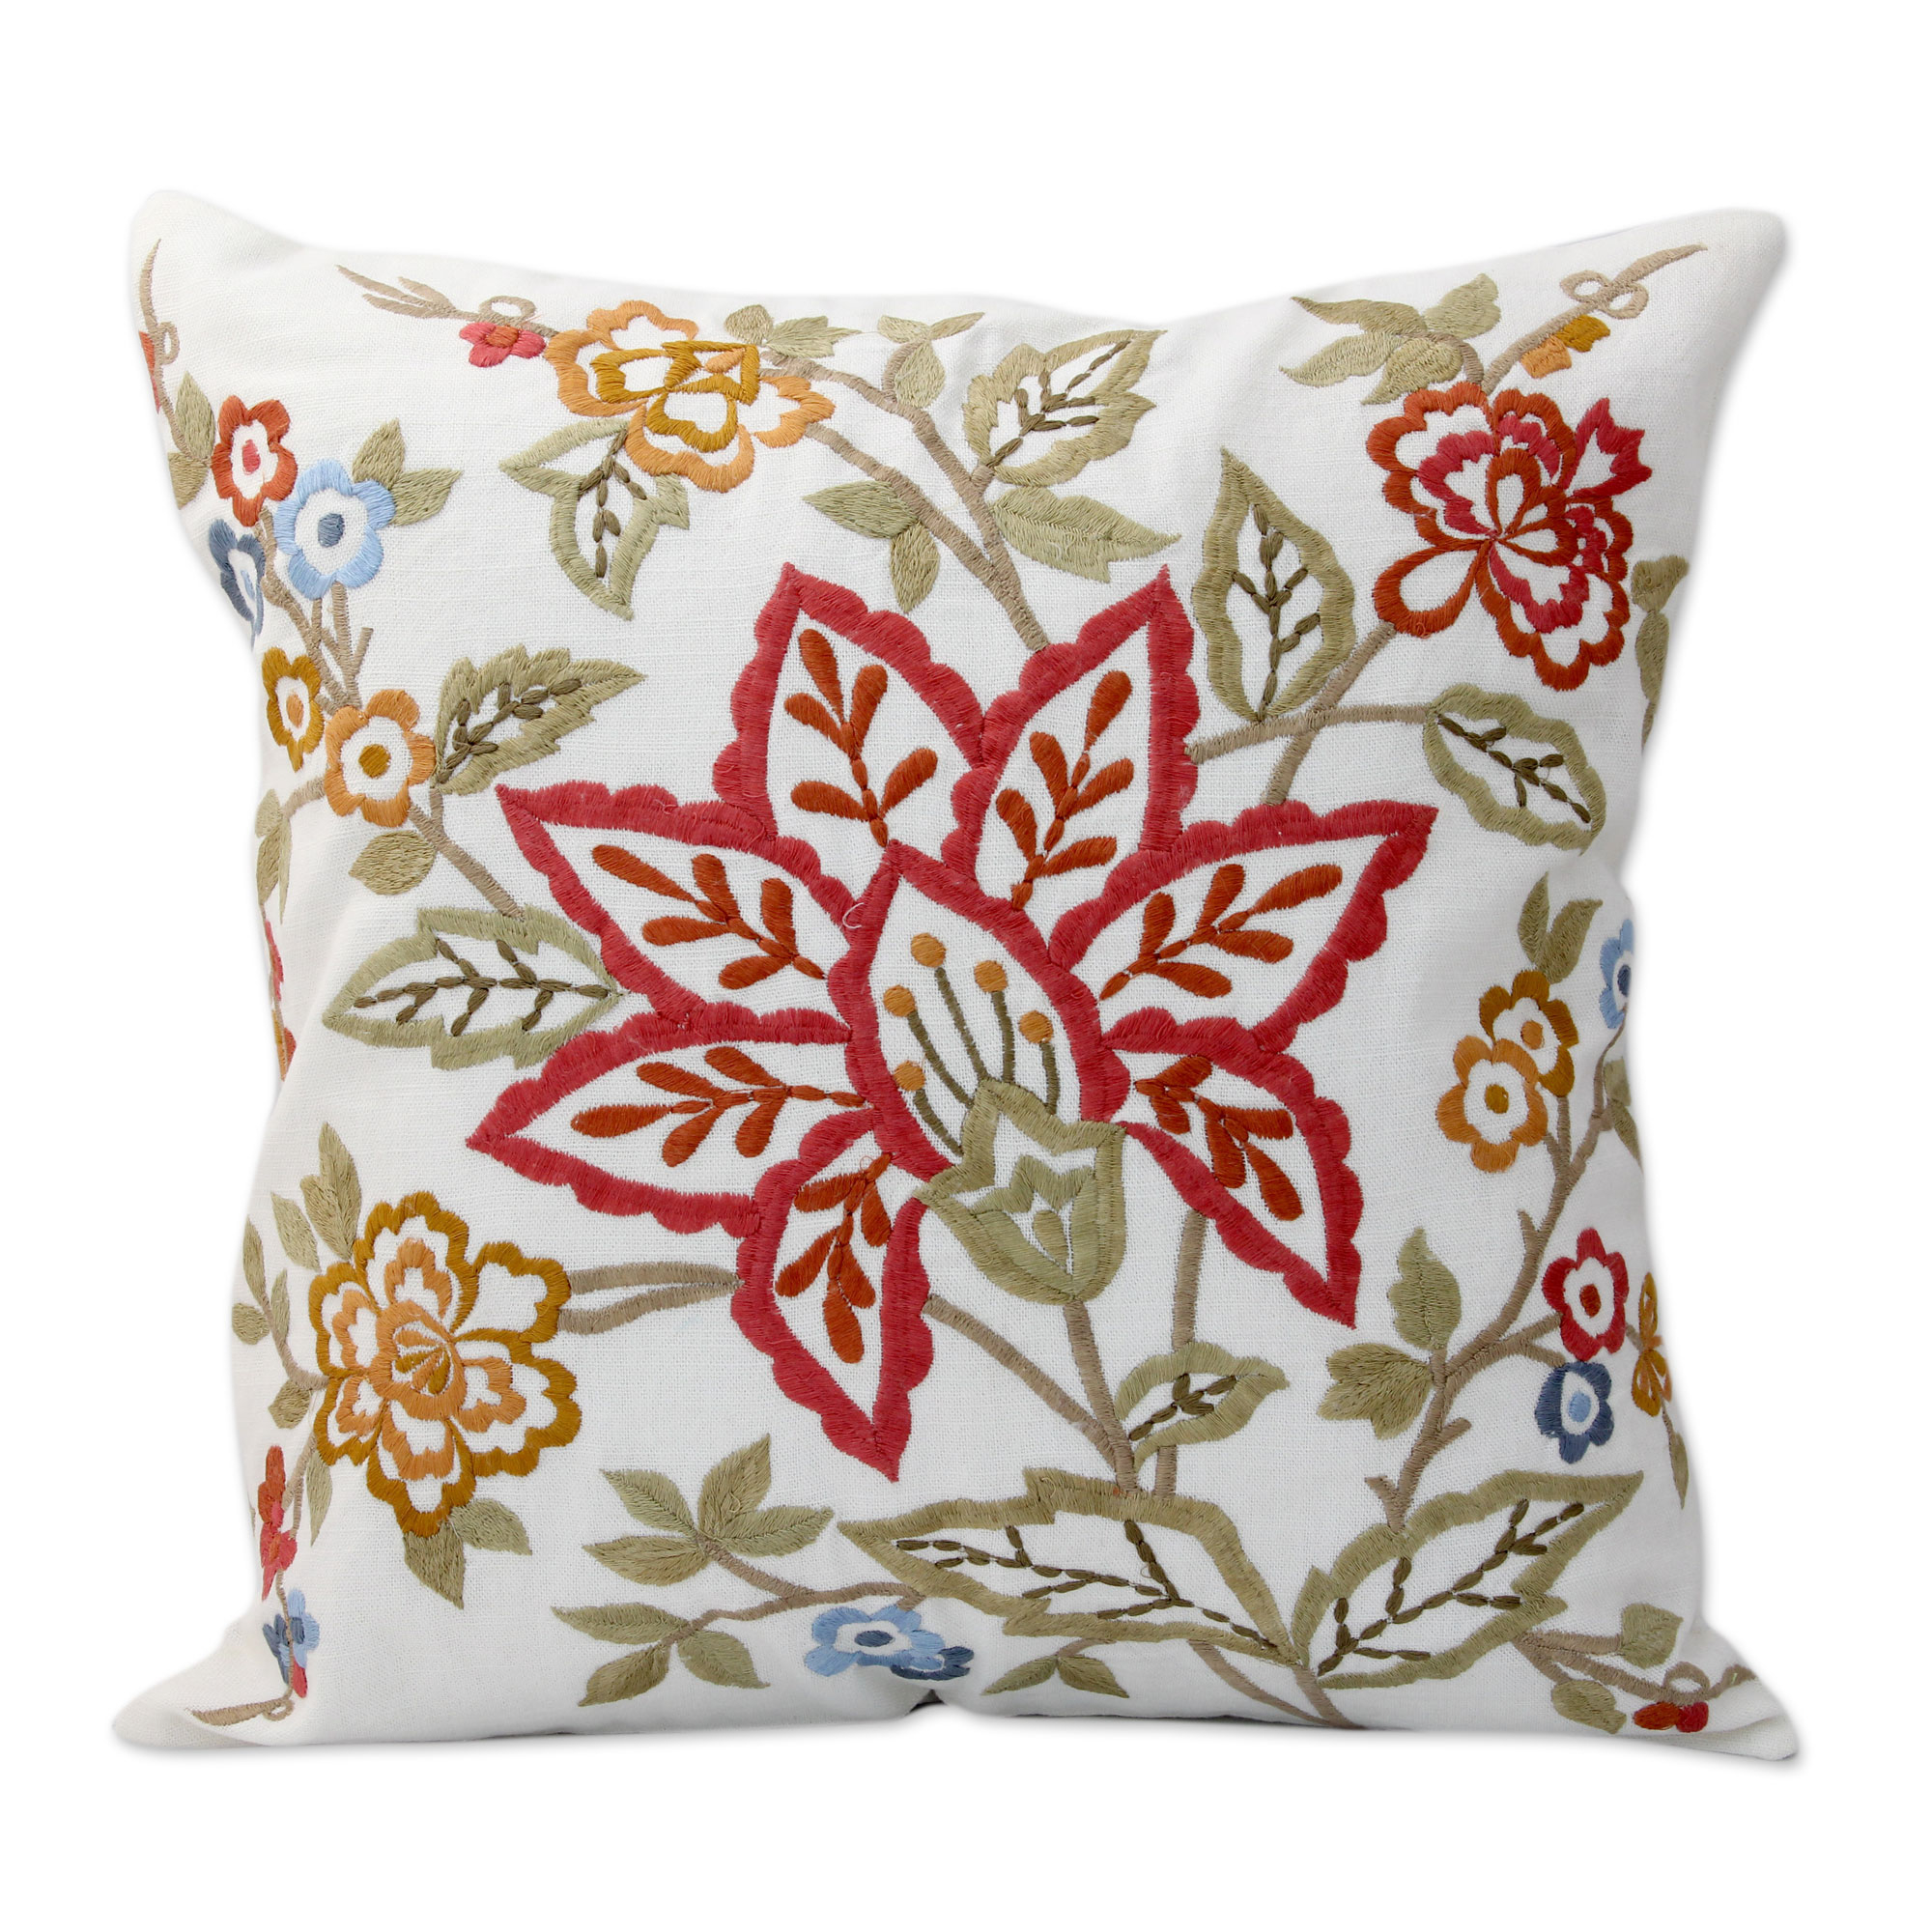 Embroidered Square Cotton Cushion Covers (Pair) - Jaipur Meadow | NOVICA